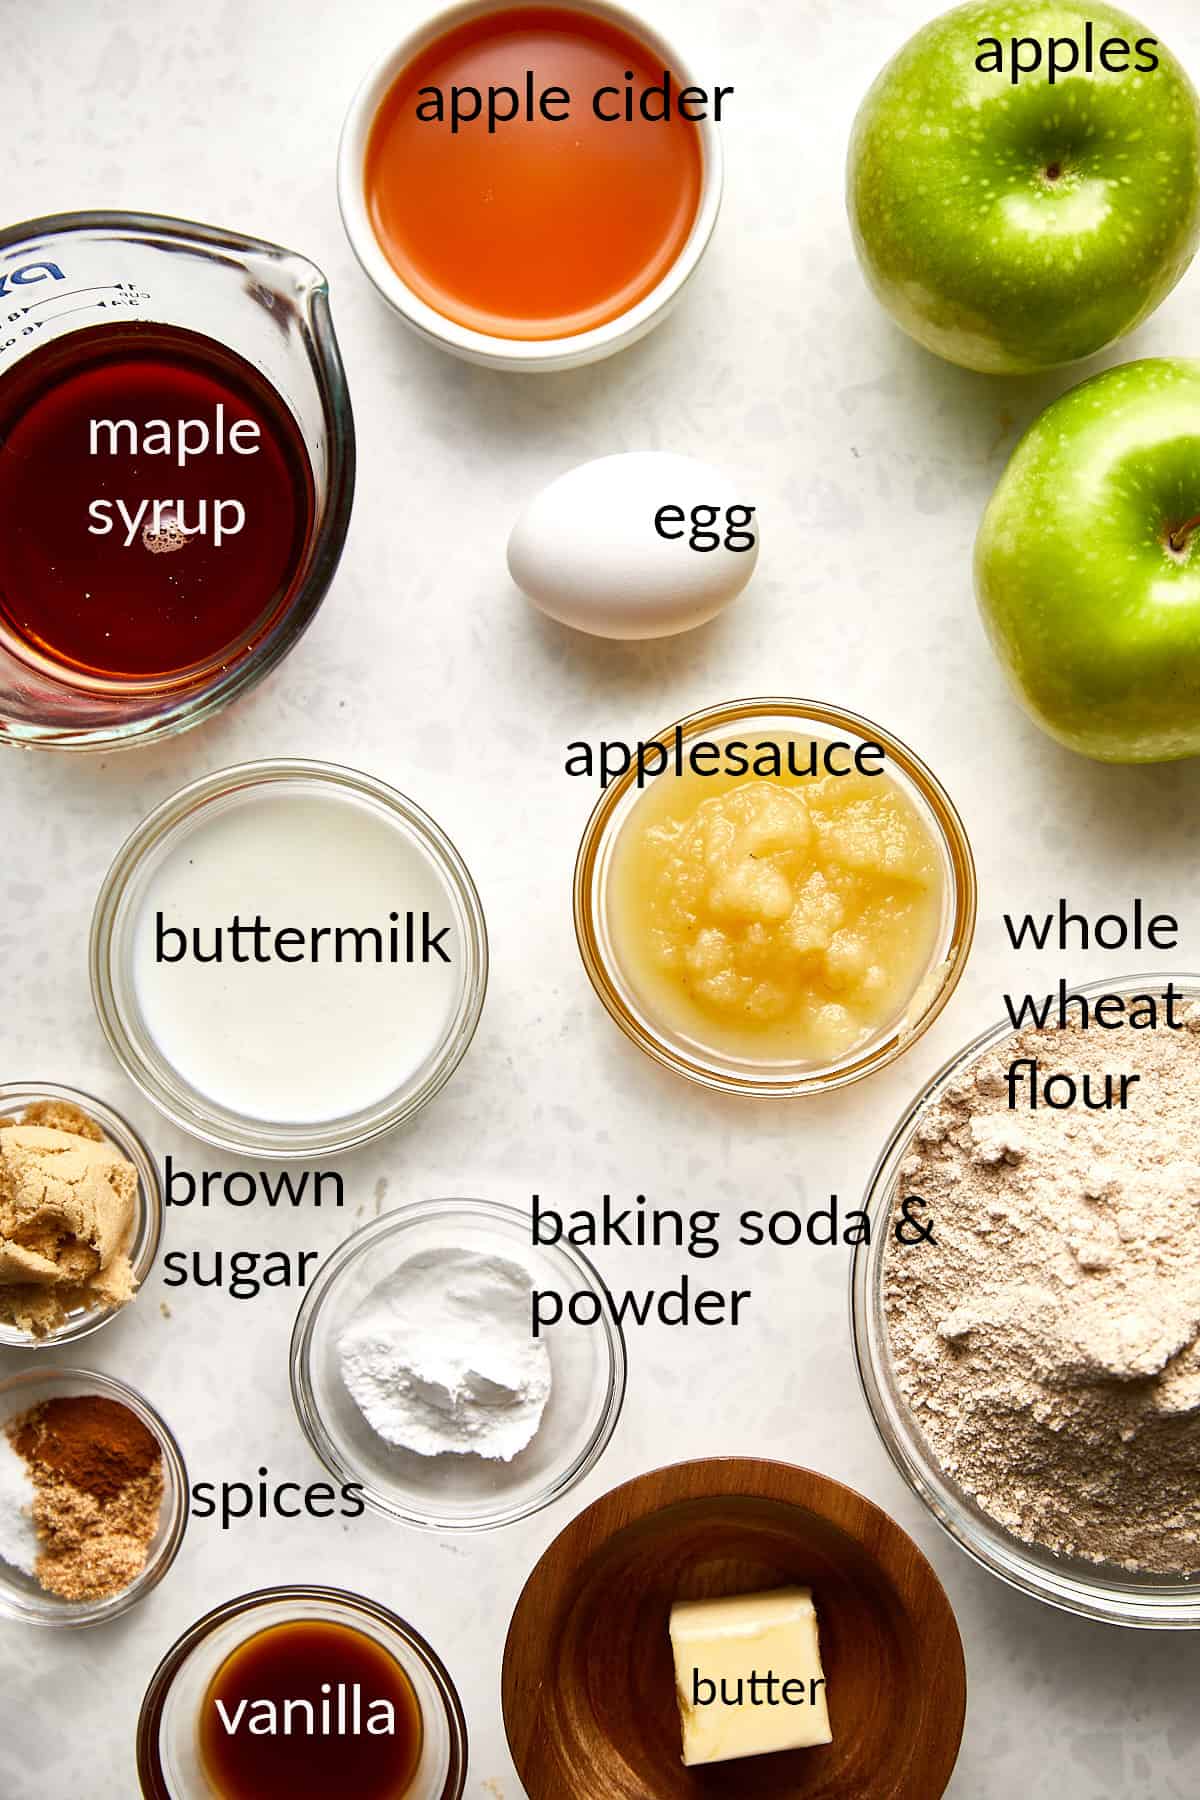 ingredients shown to make healthy apple muffins